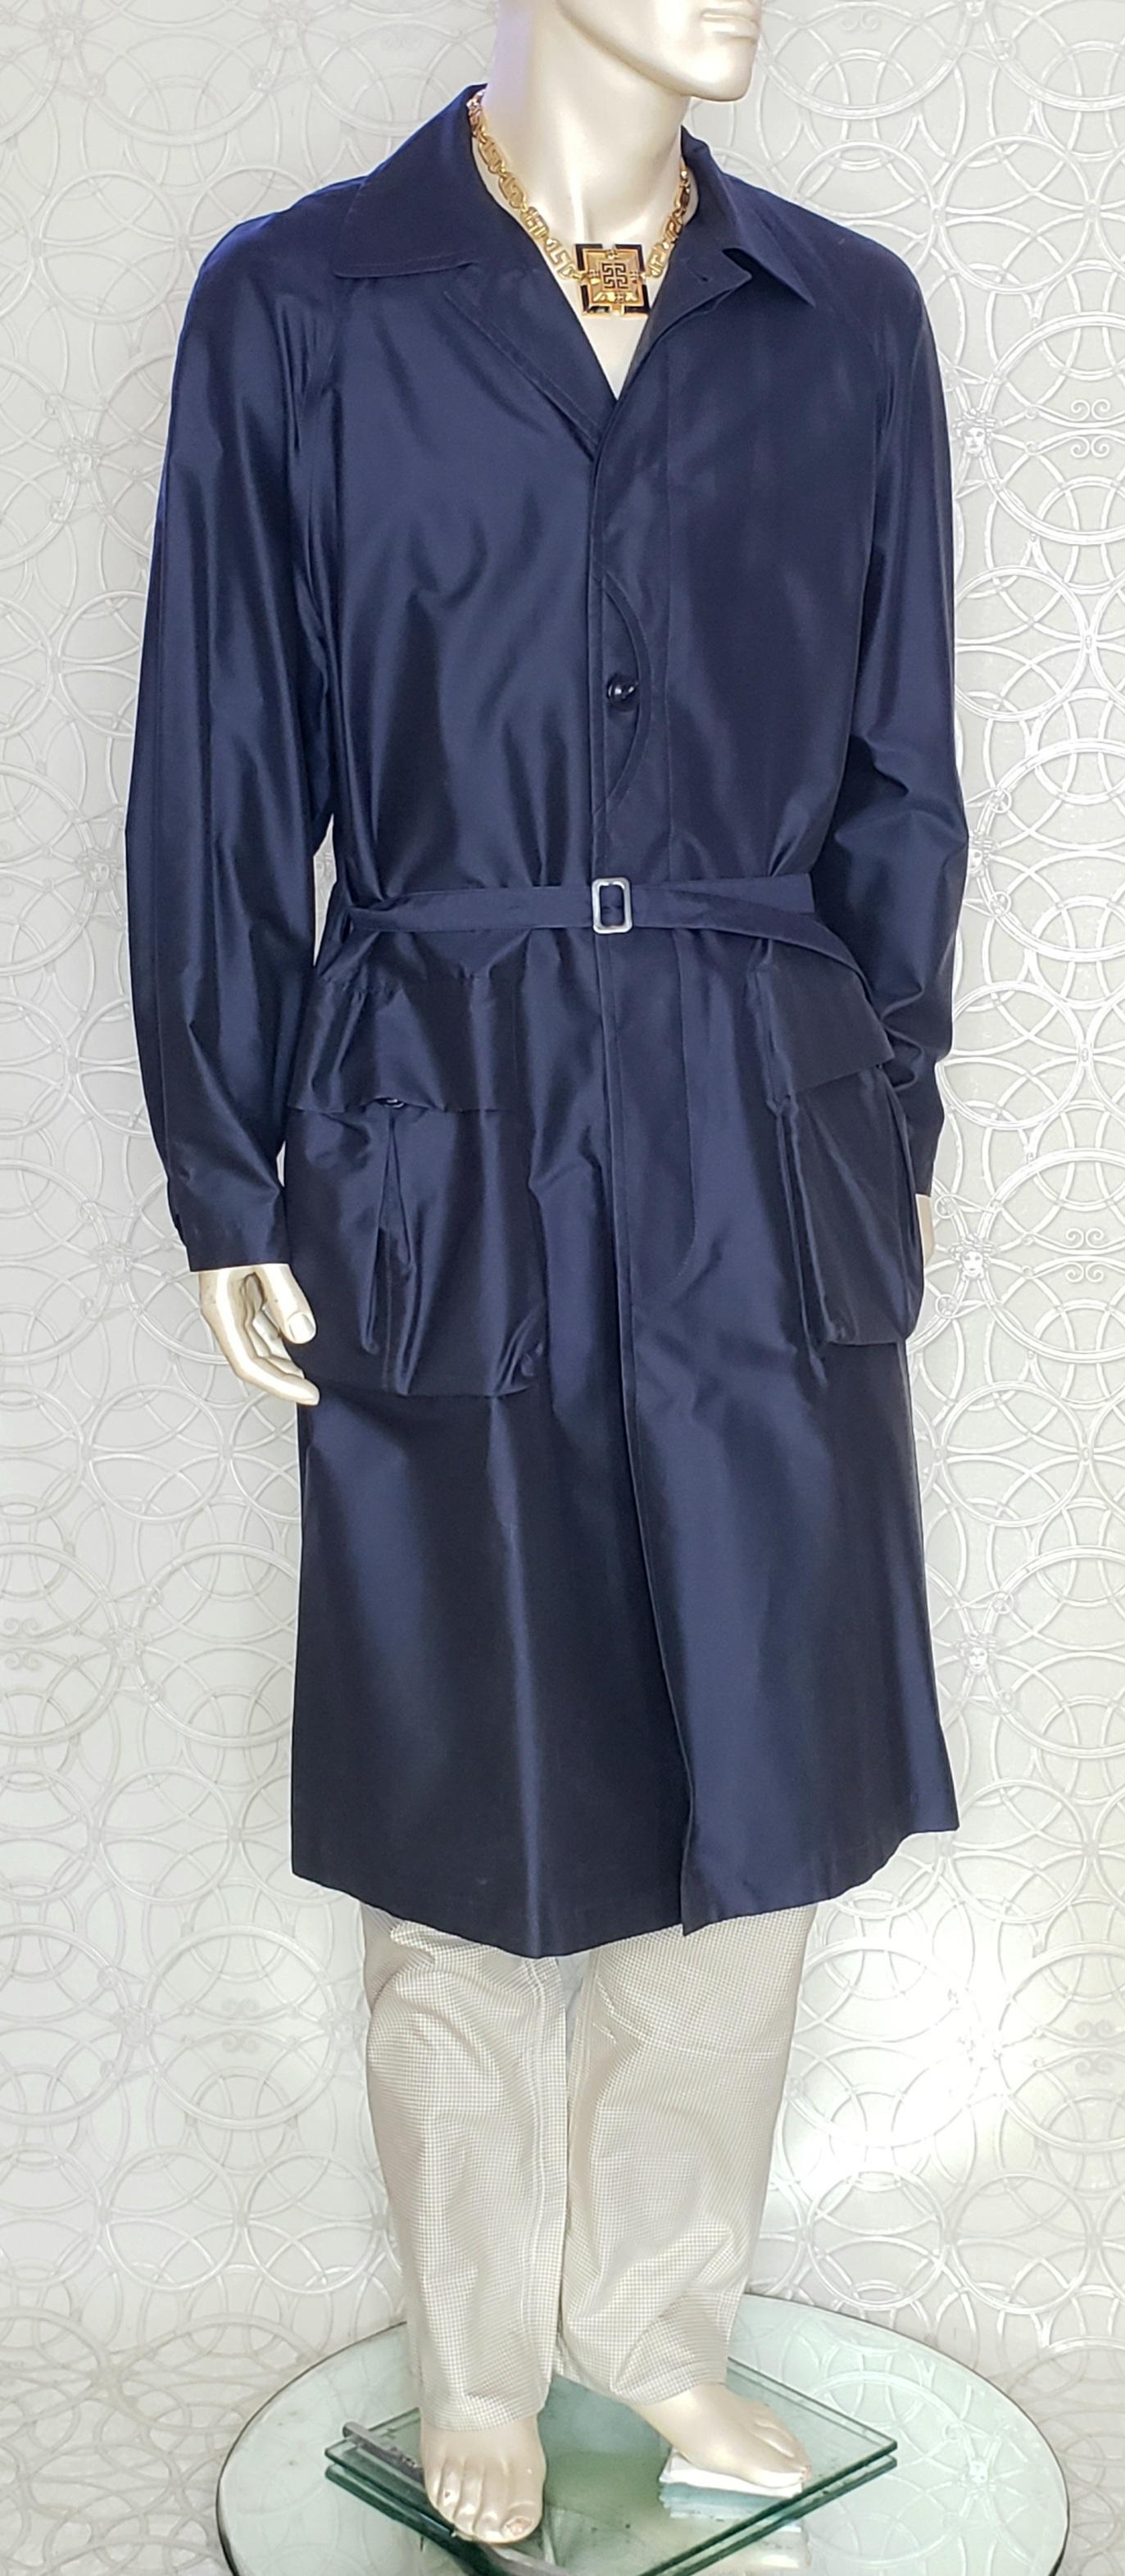 S/S 2016 Look # 34 VERSACE BELTED NAVY BLUE TRENCH SILK COAT 50 - 40 For Sale 4